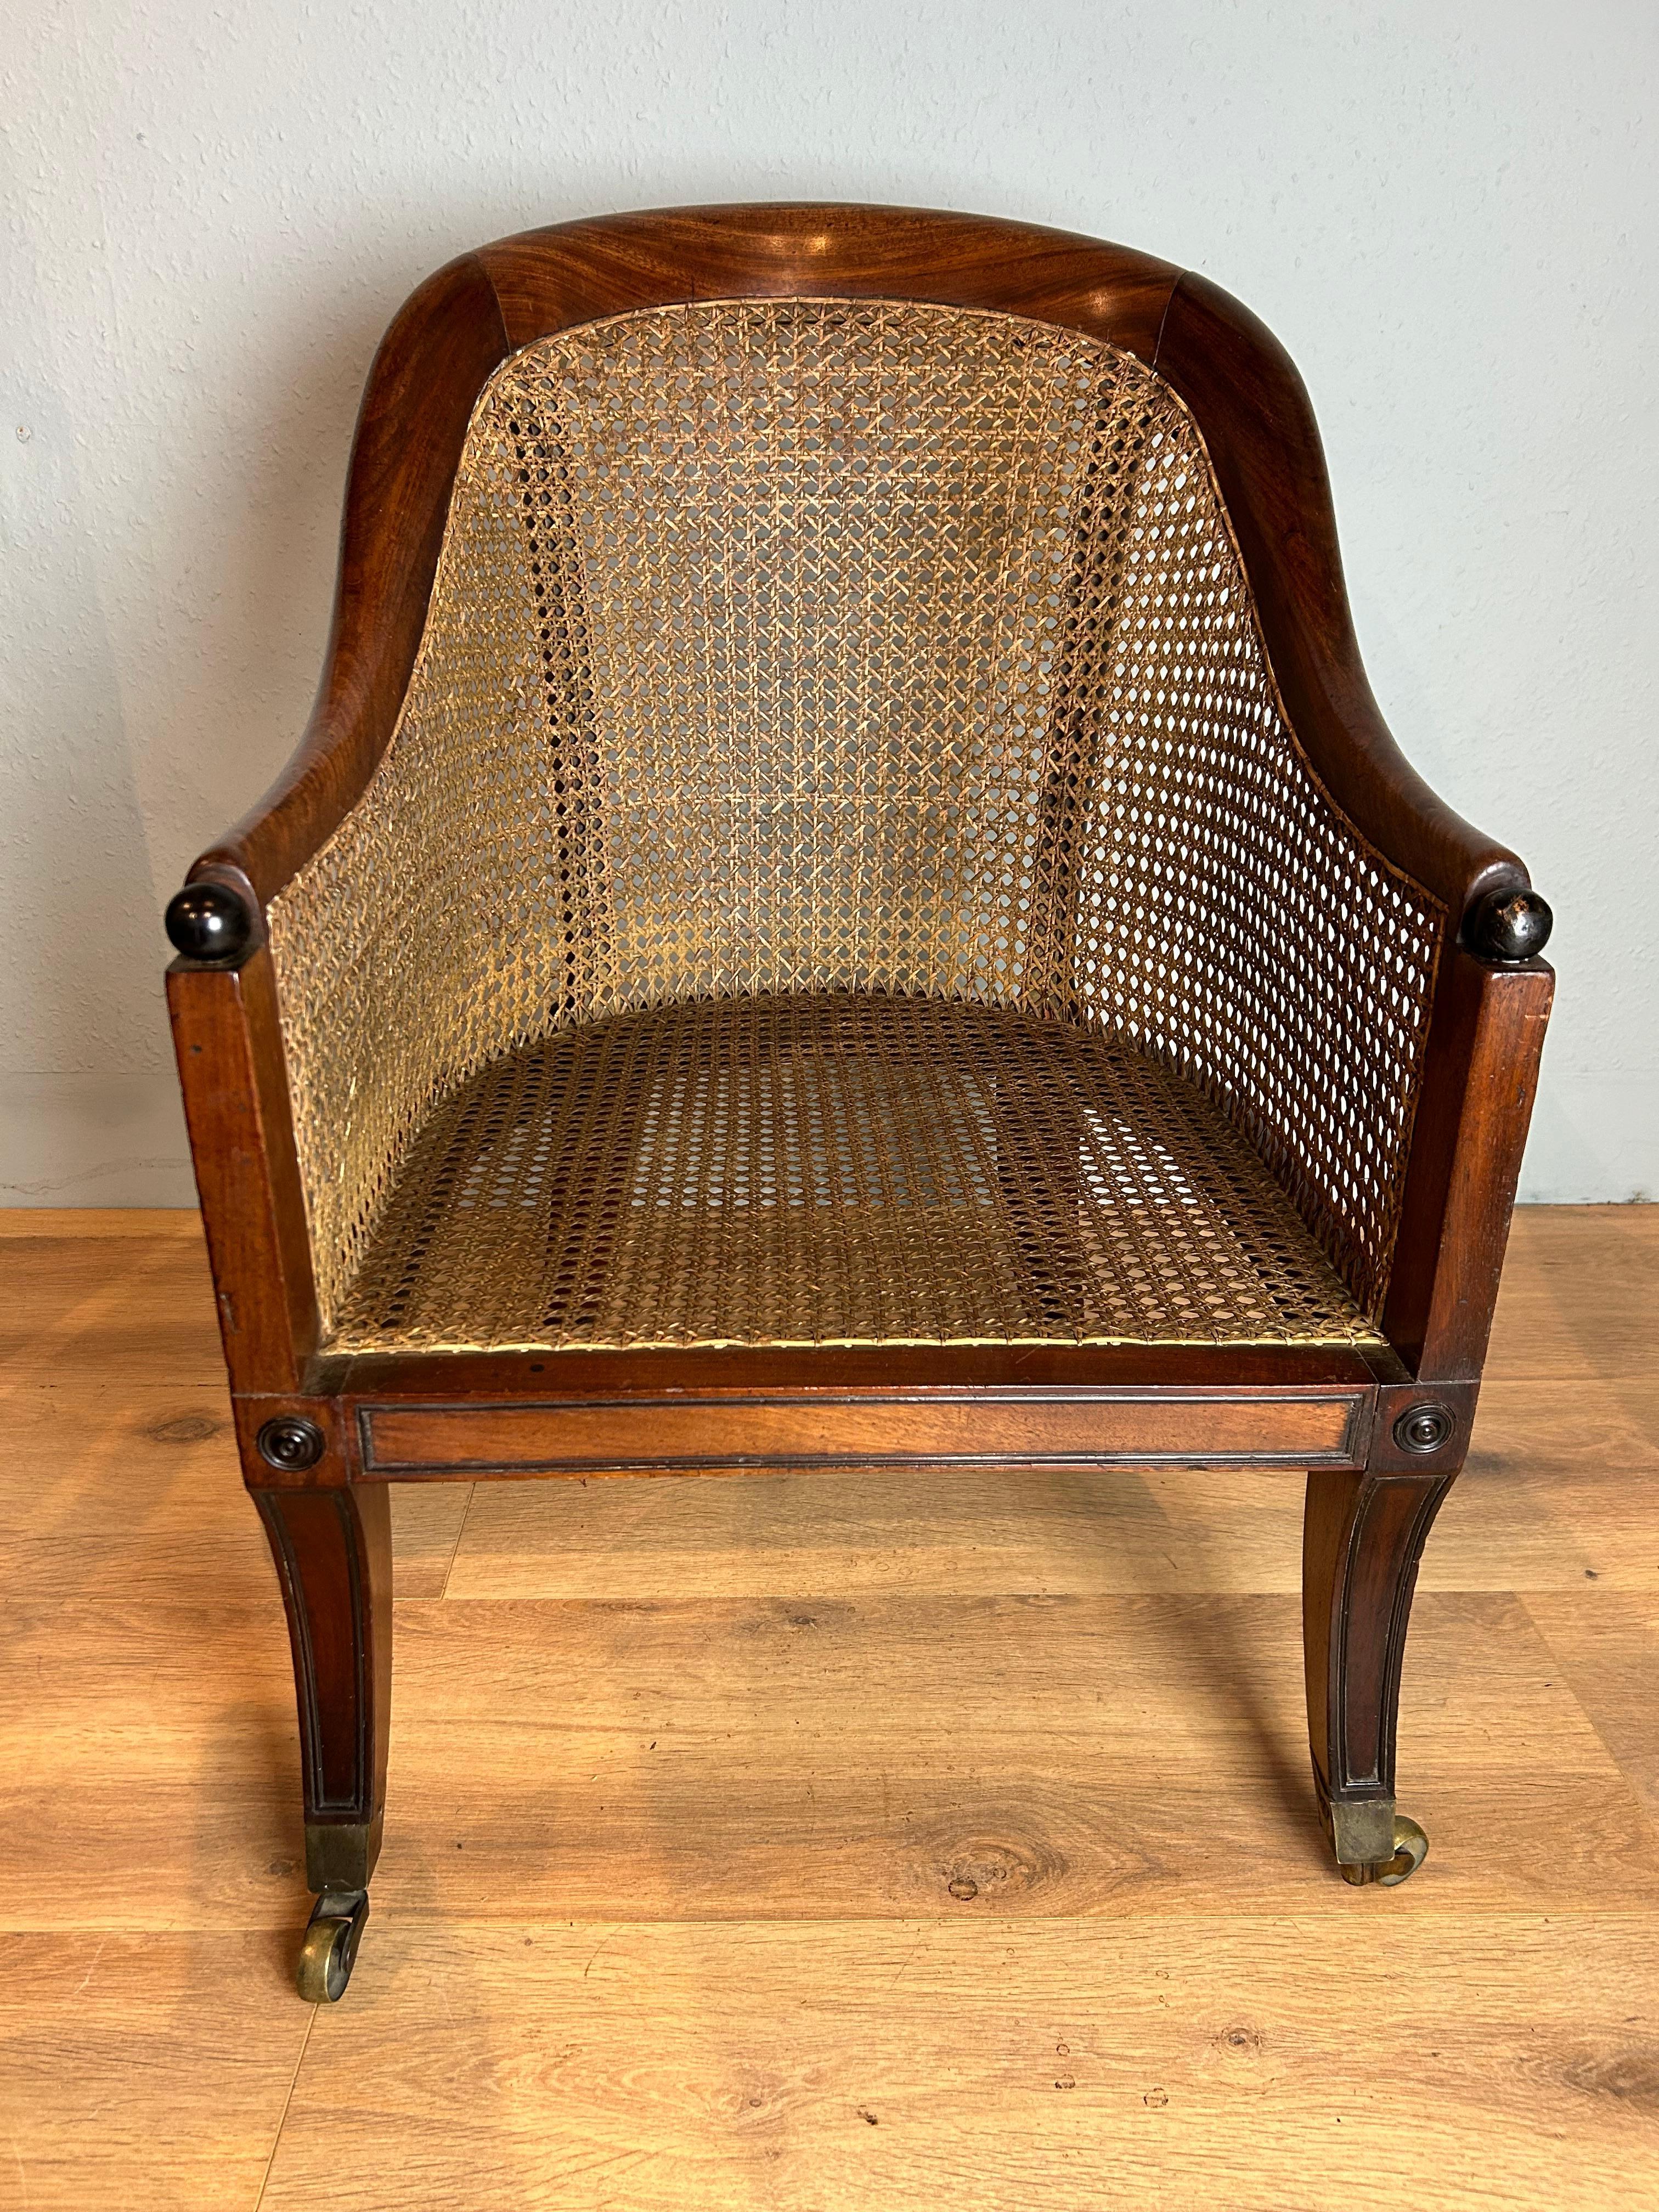 English mahogany bergere arm chair Regency period circa 1815 attributed to Gillows. Frame caned throughout with arched top rail and down swept arms ending with ball ebonised terminals on moulded sabre legs with applied turned roundals to the front